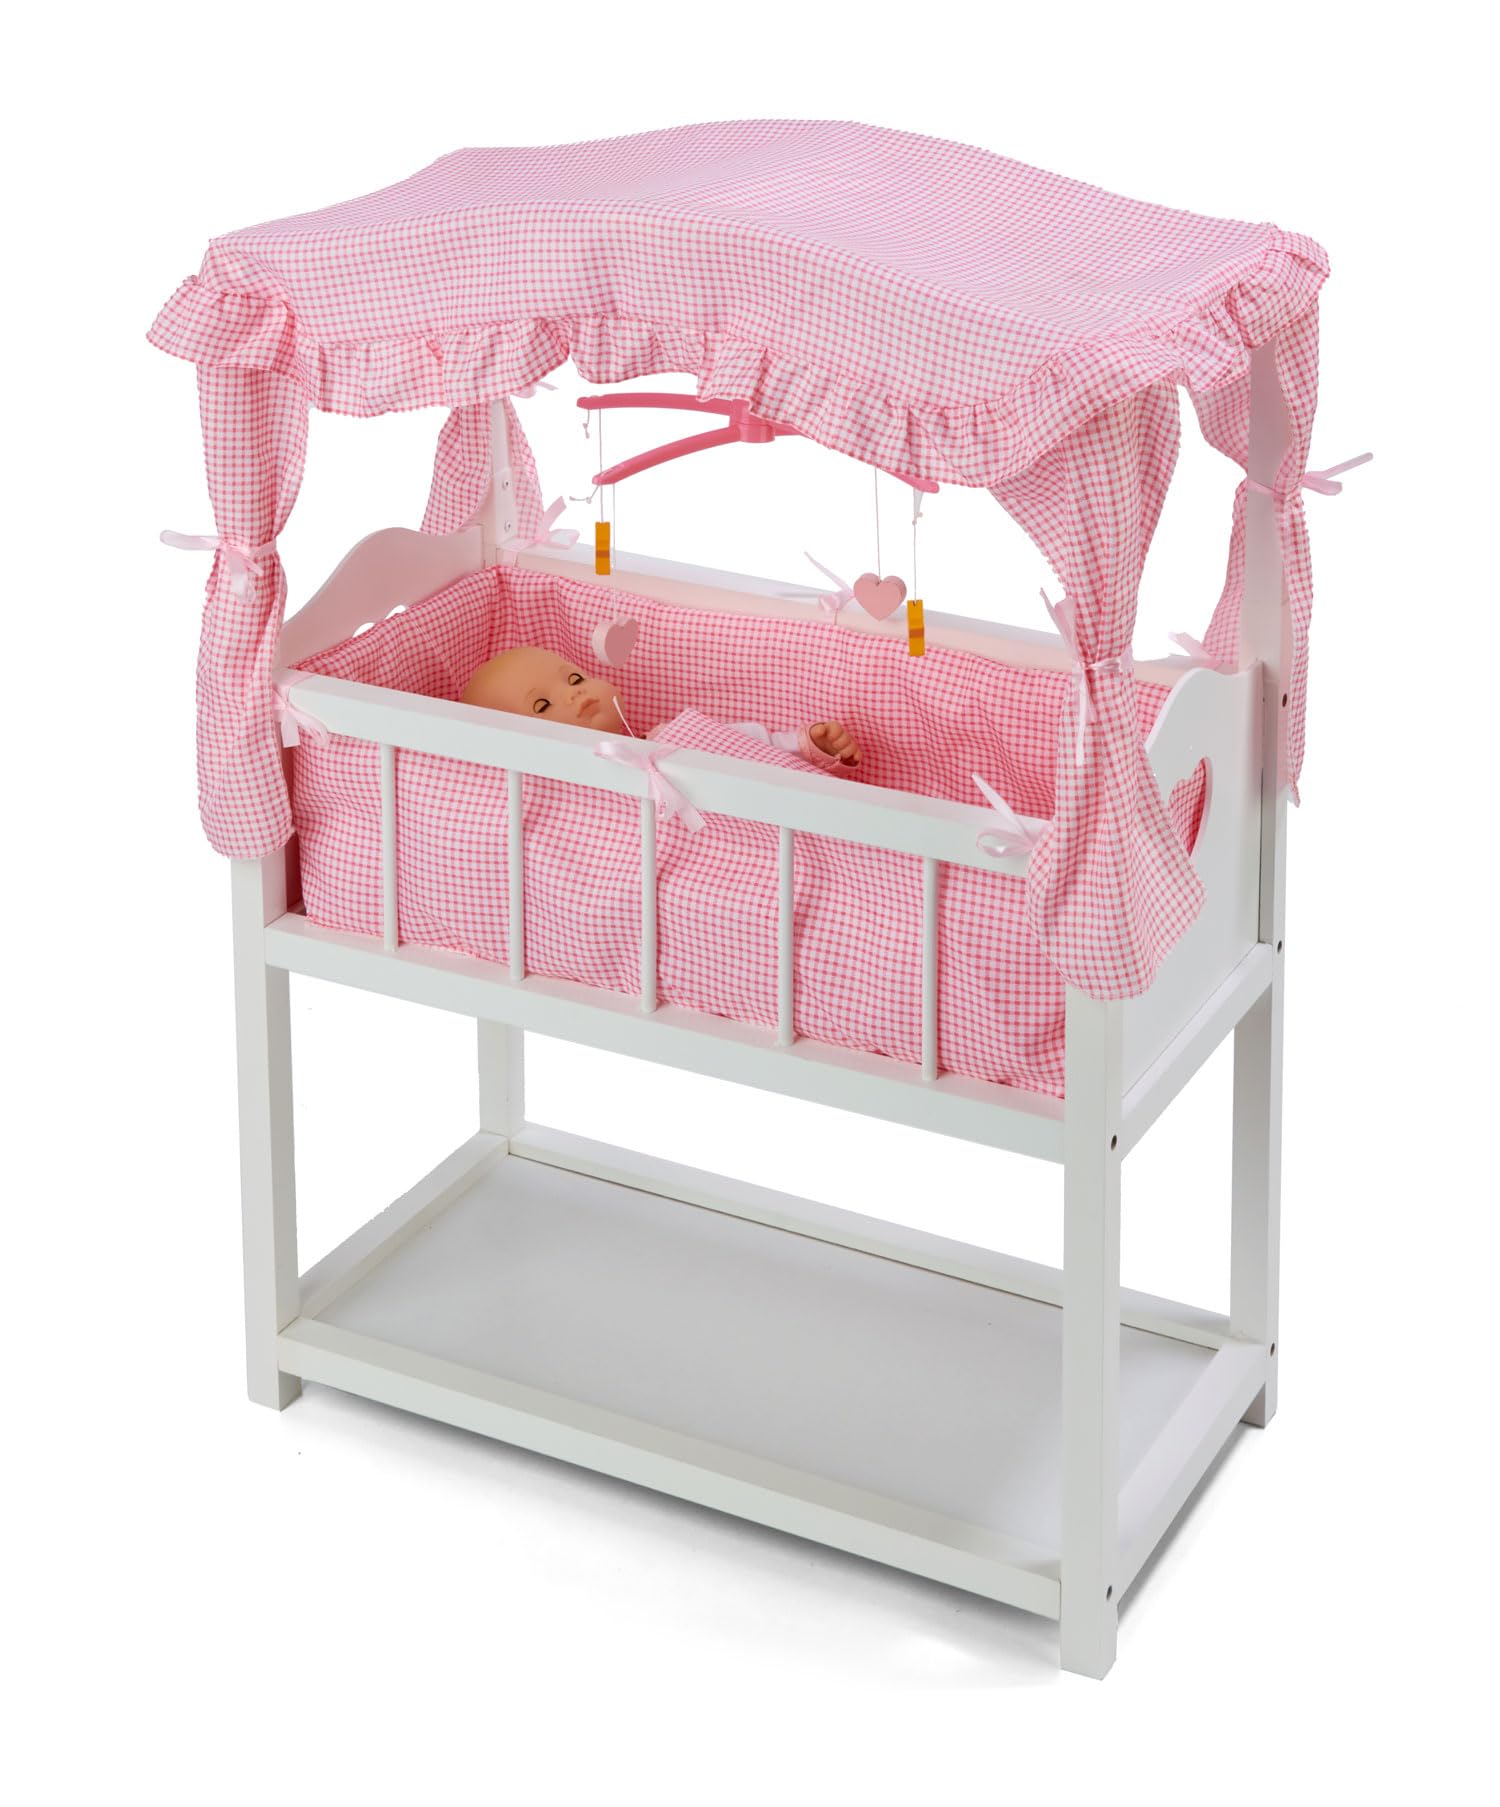 Badger Basket Toy Doll Bed with Storage Baskets, Gingham Bedding, and Musical Mobile for 22 inch Dolls - White/Pink